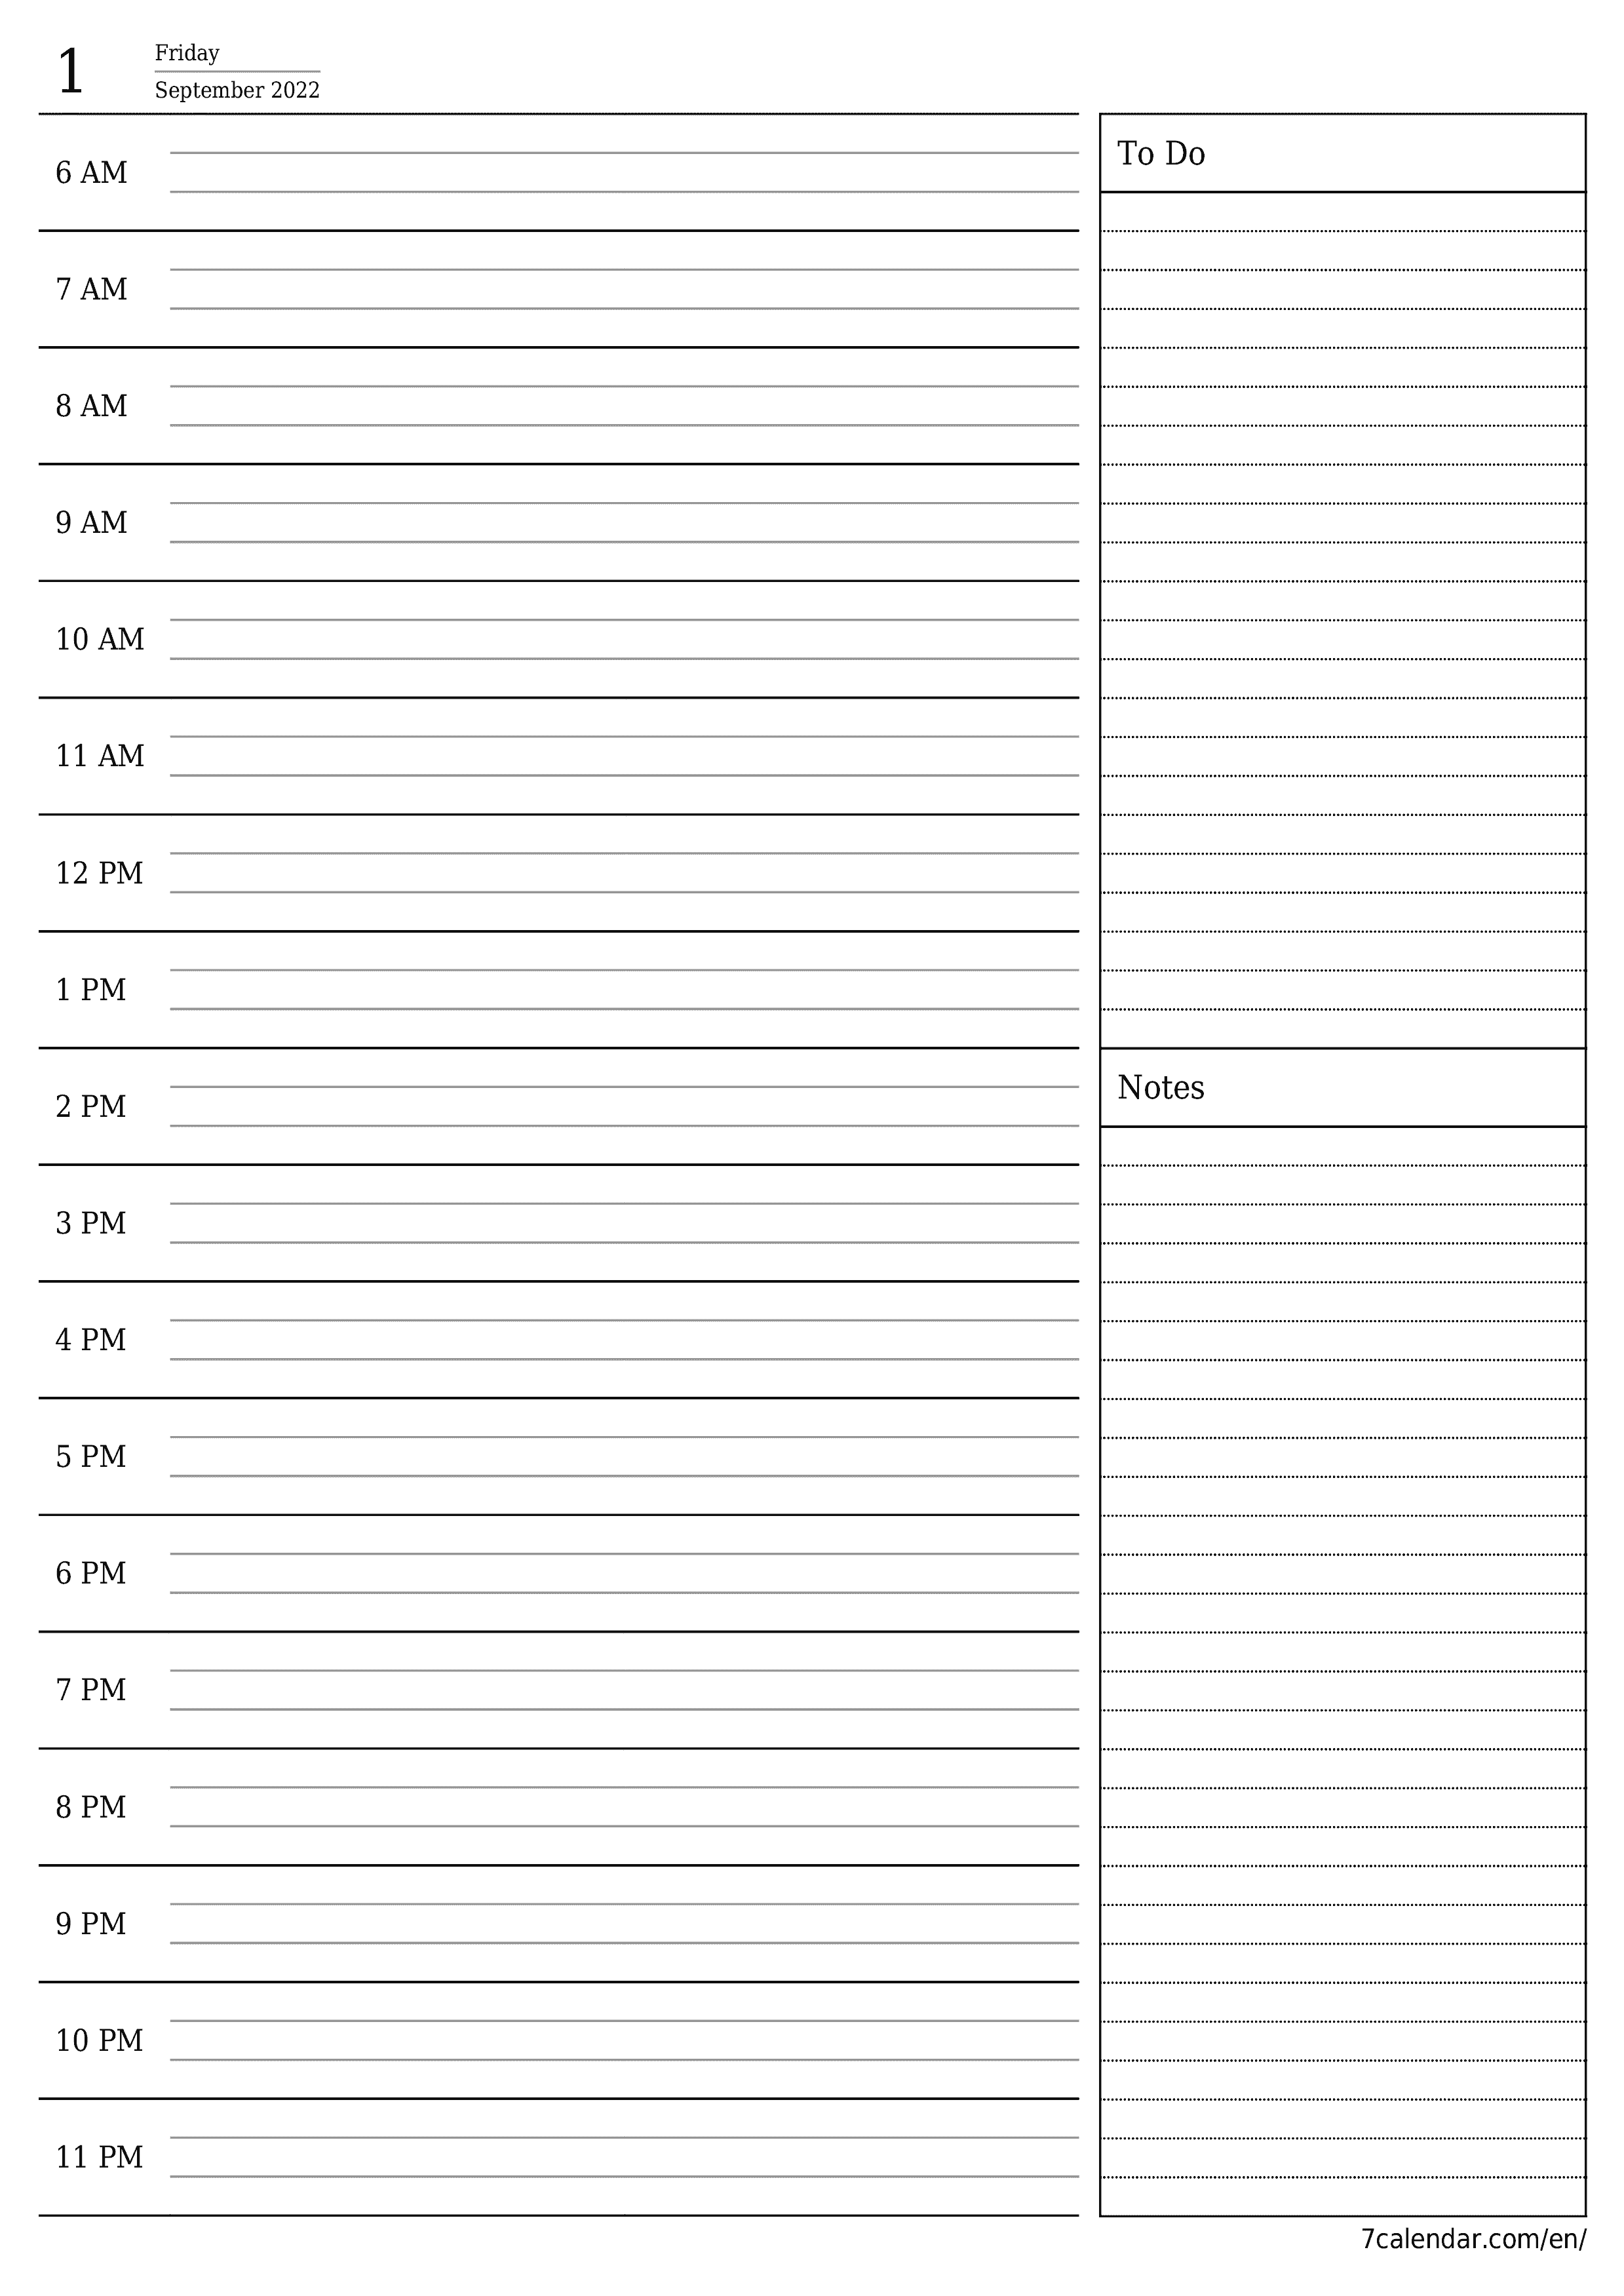 Blank daily printable calendar and planner for day September 2022 with notes, save and print to PDF PNG English - 7calendar.com